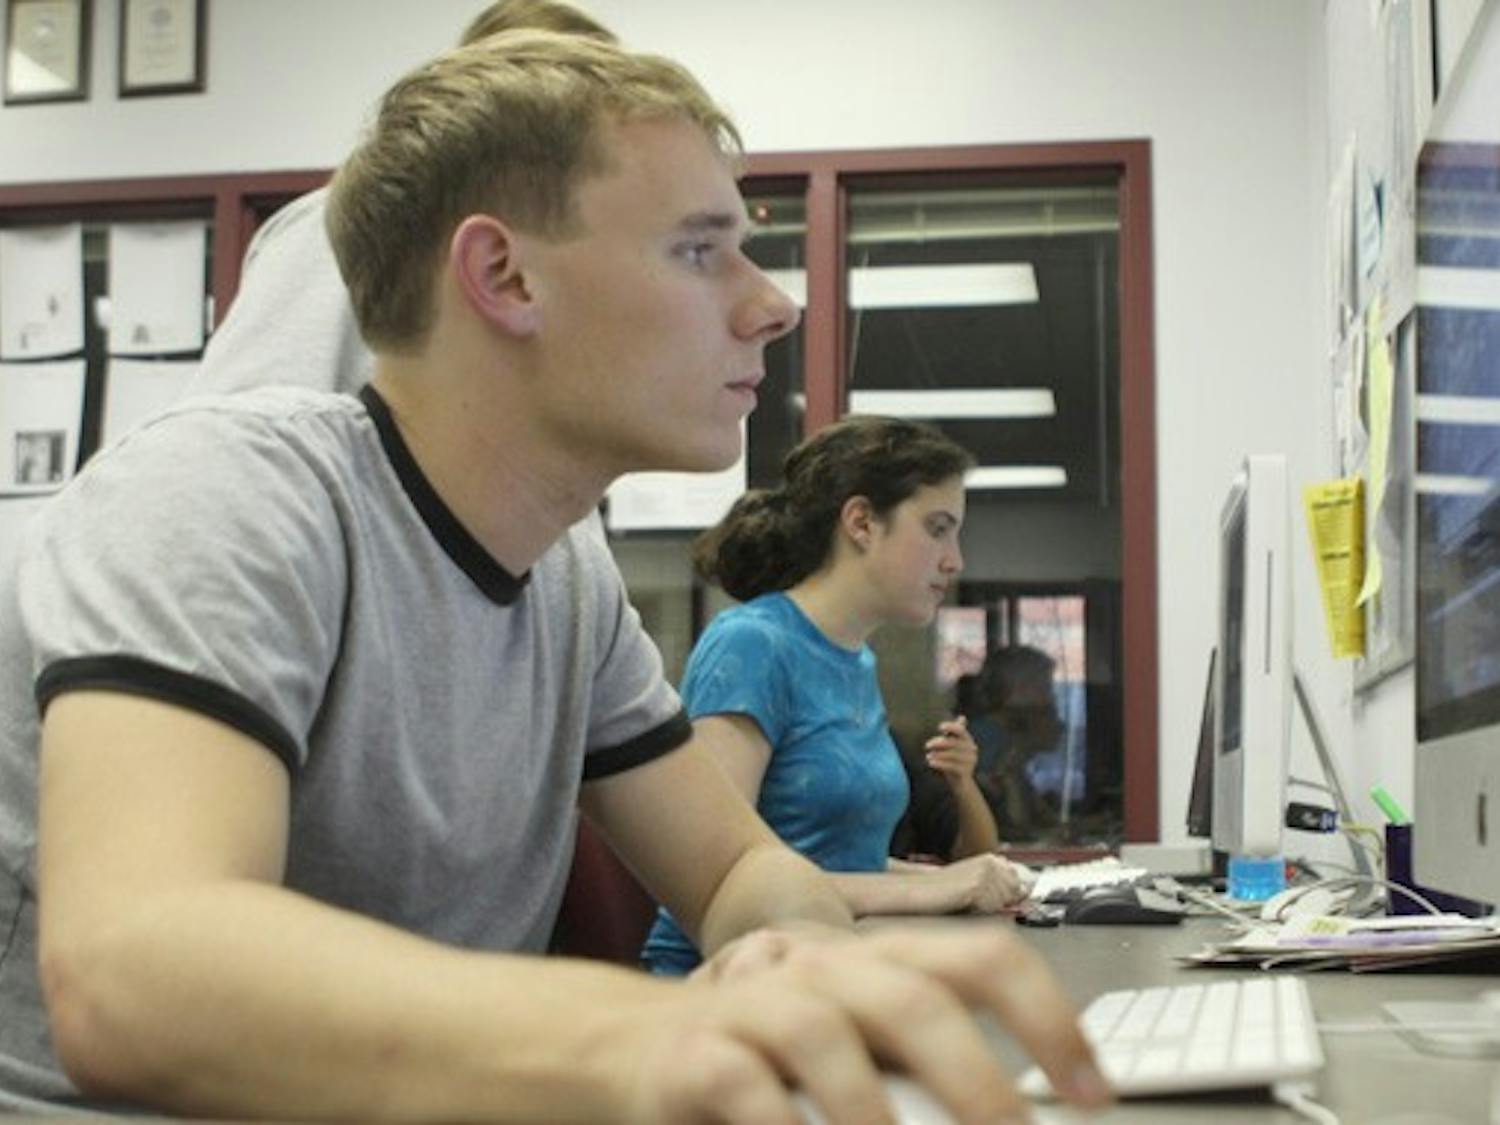 The Technician, North Carolina State University&amp;#039;s student daily newspaper, lost its editor-in-chief and managing editor over a span of two weeks earlier this year. Students are looking to rebuild the group&amp;#039;s leadership next year.